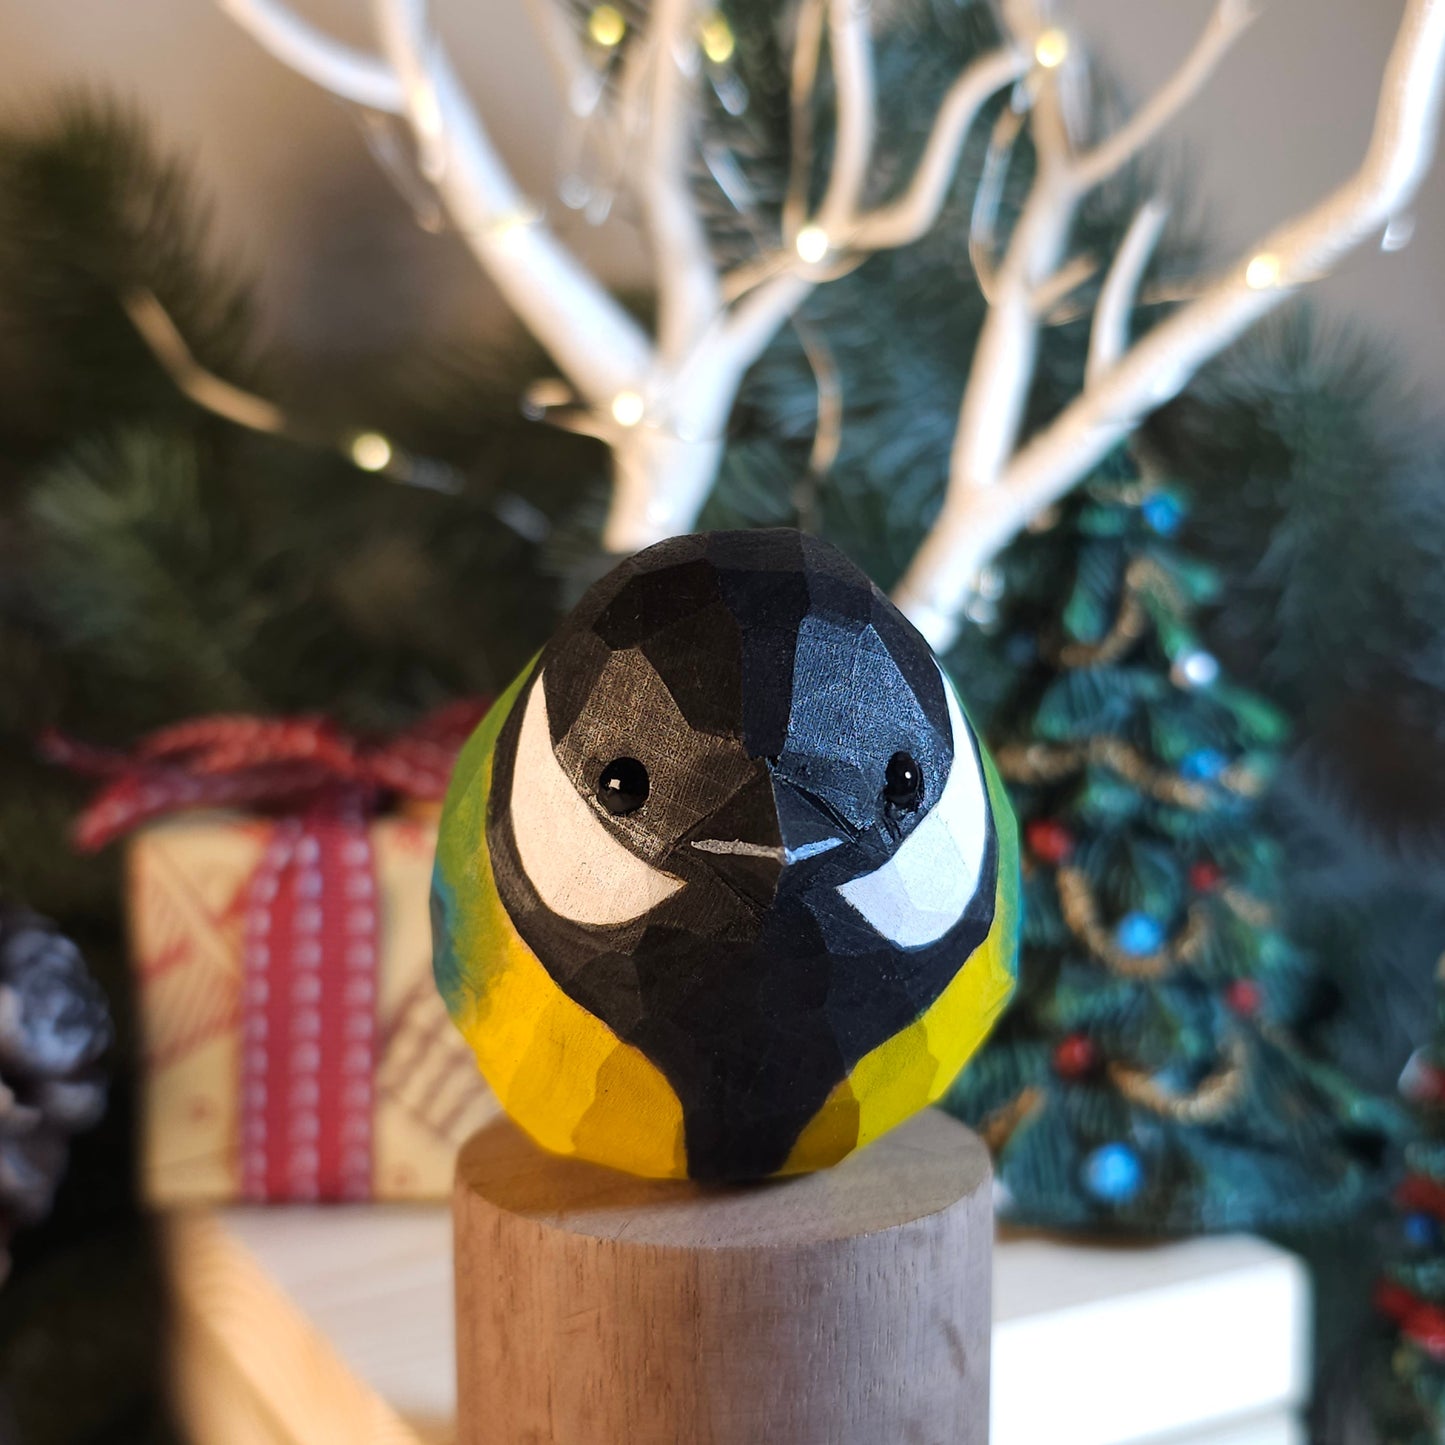 Artisan-Crafted Hand-Painted Wooden Great Tit Figurine - A Perfect Blend of Nature and Craftsmanship - PAINTED BIRD SHOP